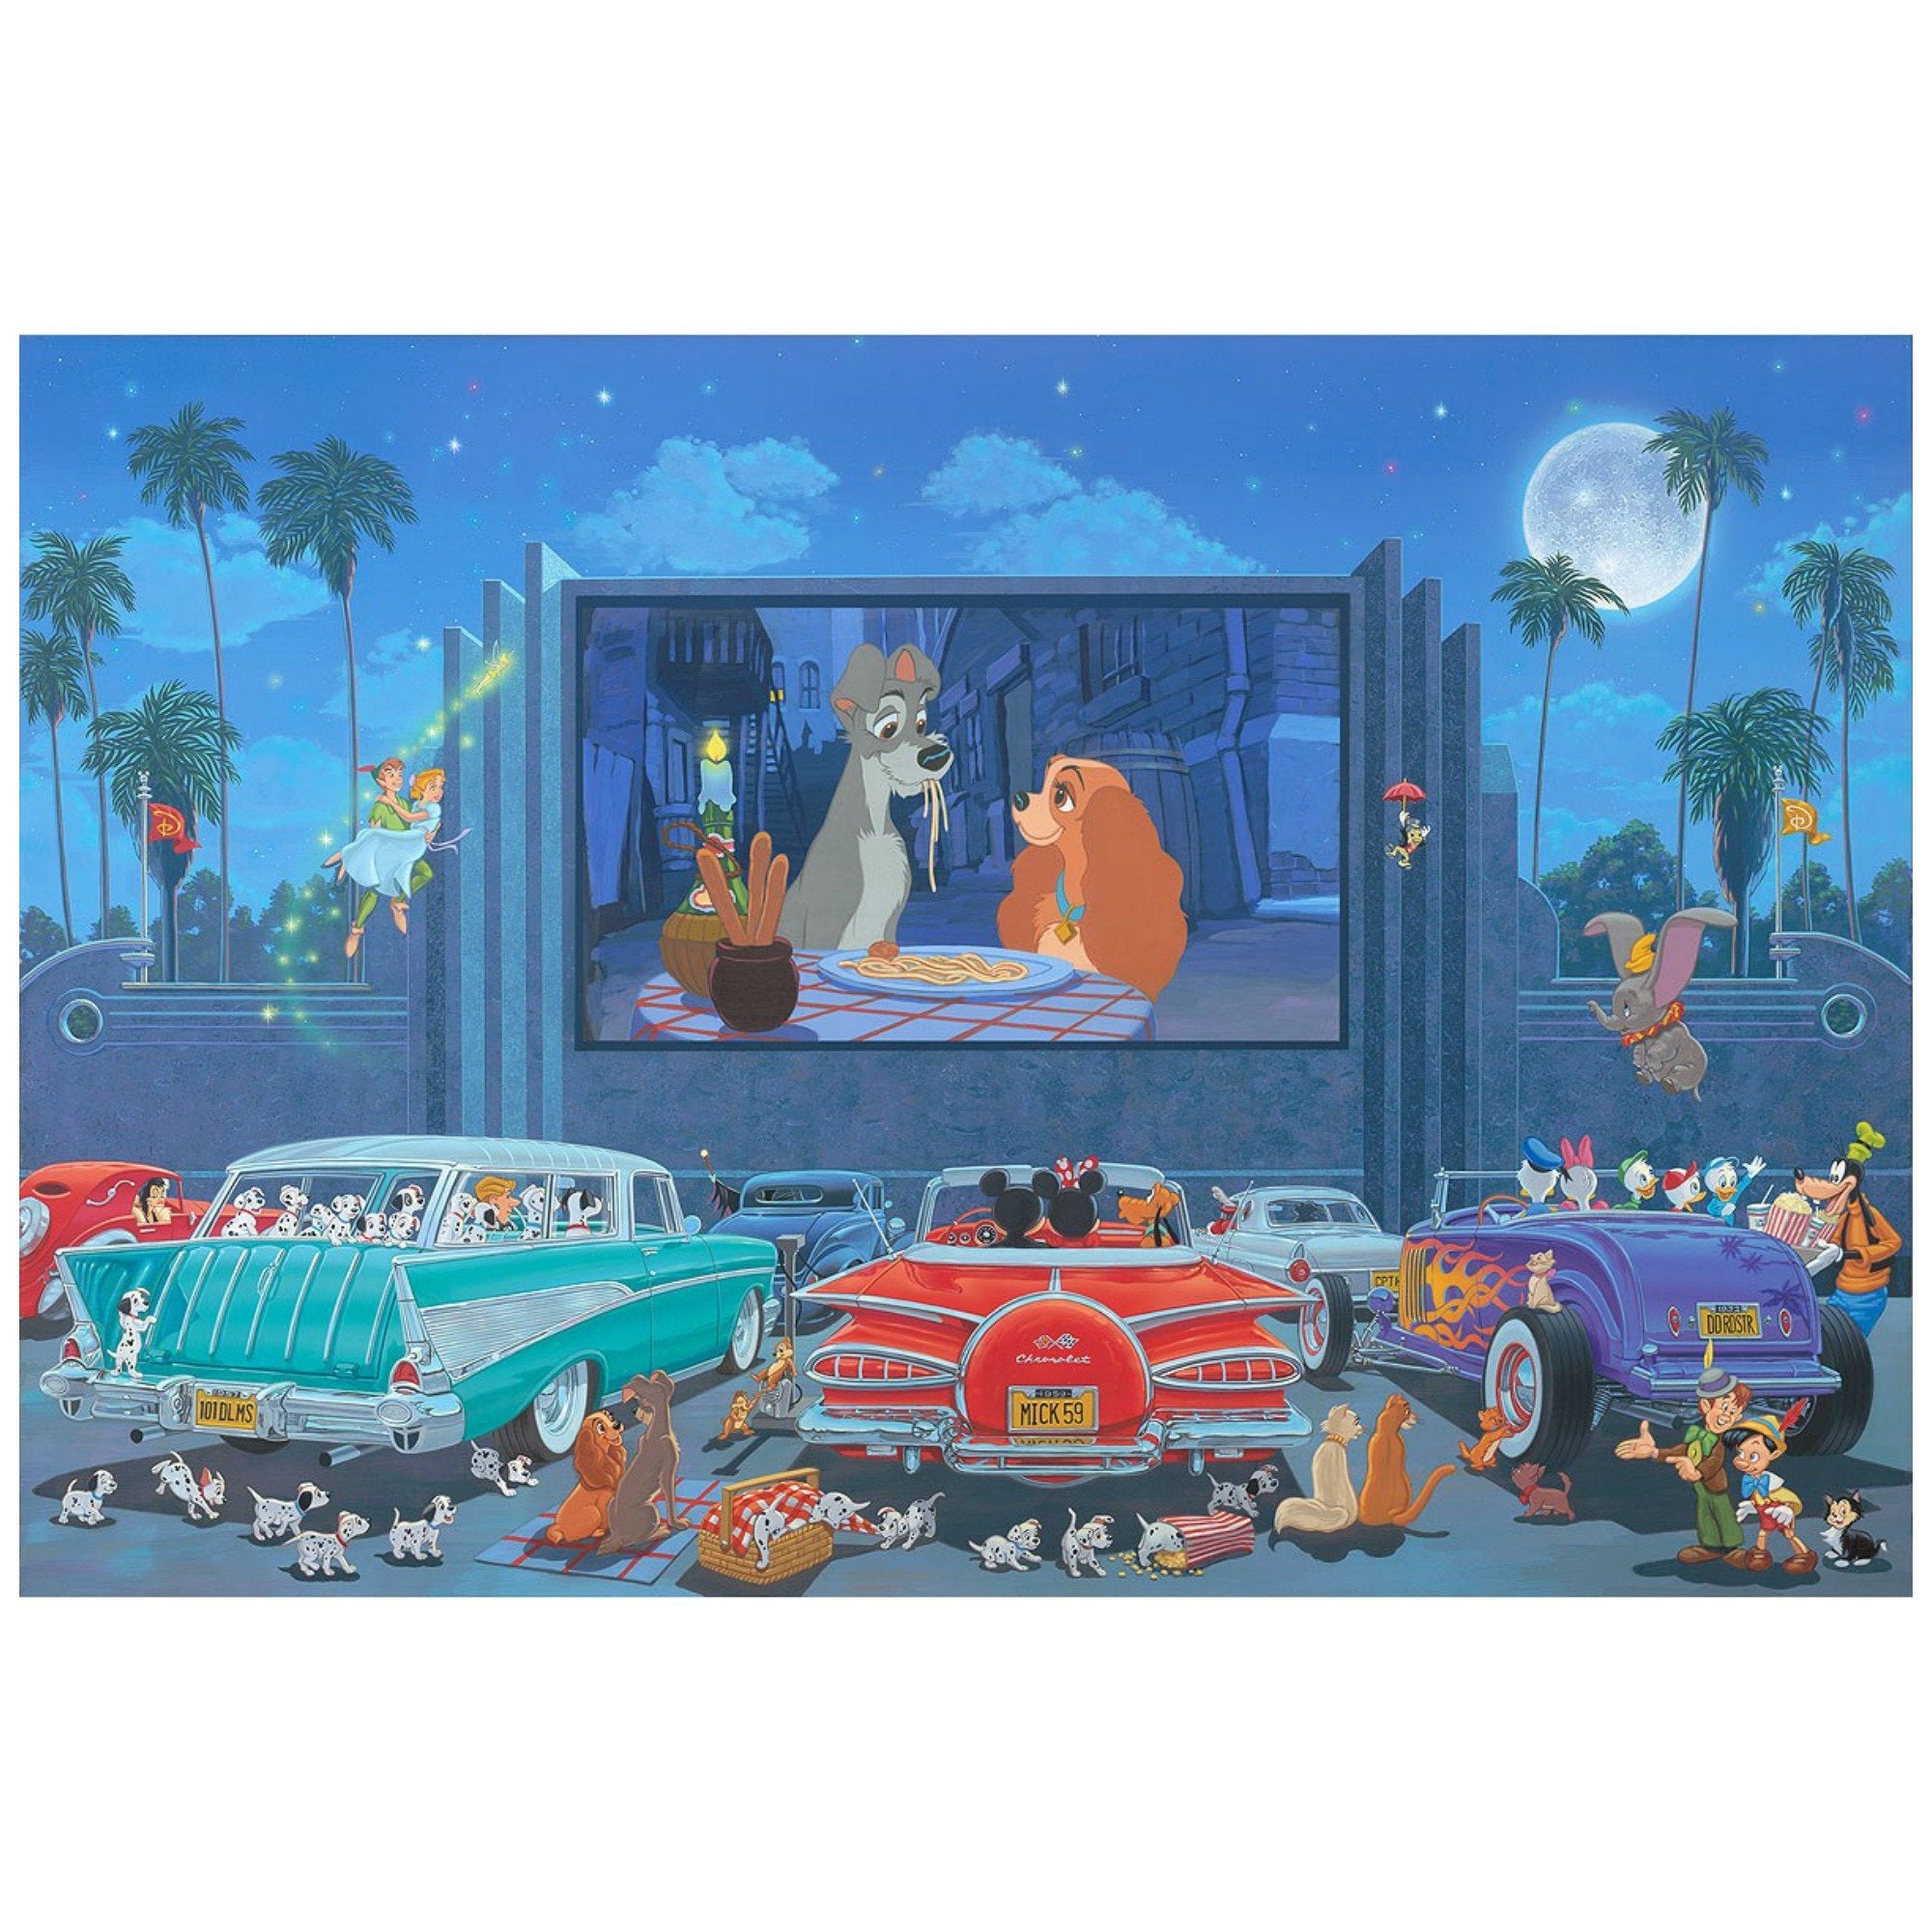 A Night at the Movies by Manuel Hernandez.  Mickey and Minnie at the Drive-in movie, watching a Lady and the Trap movie.